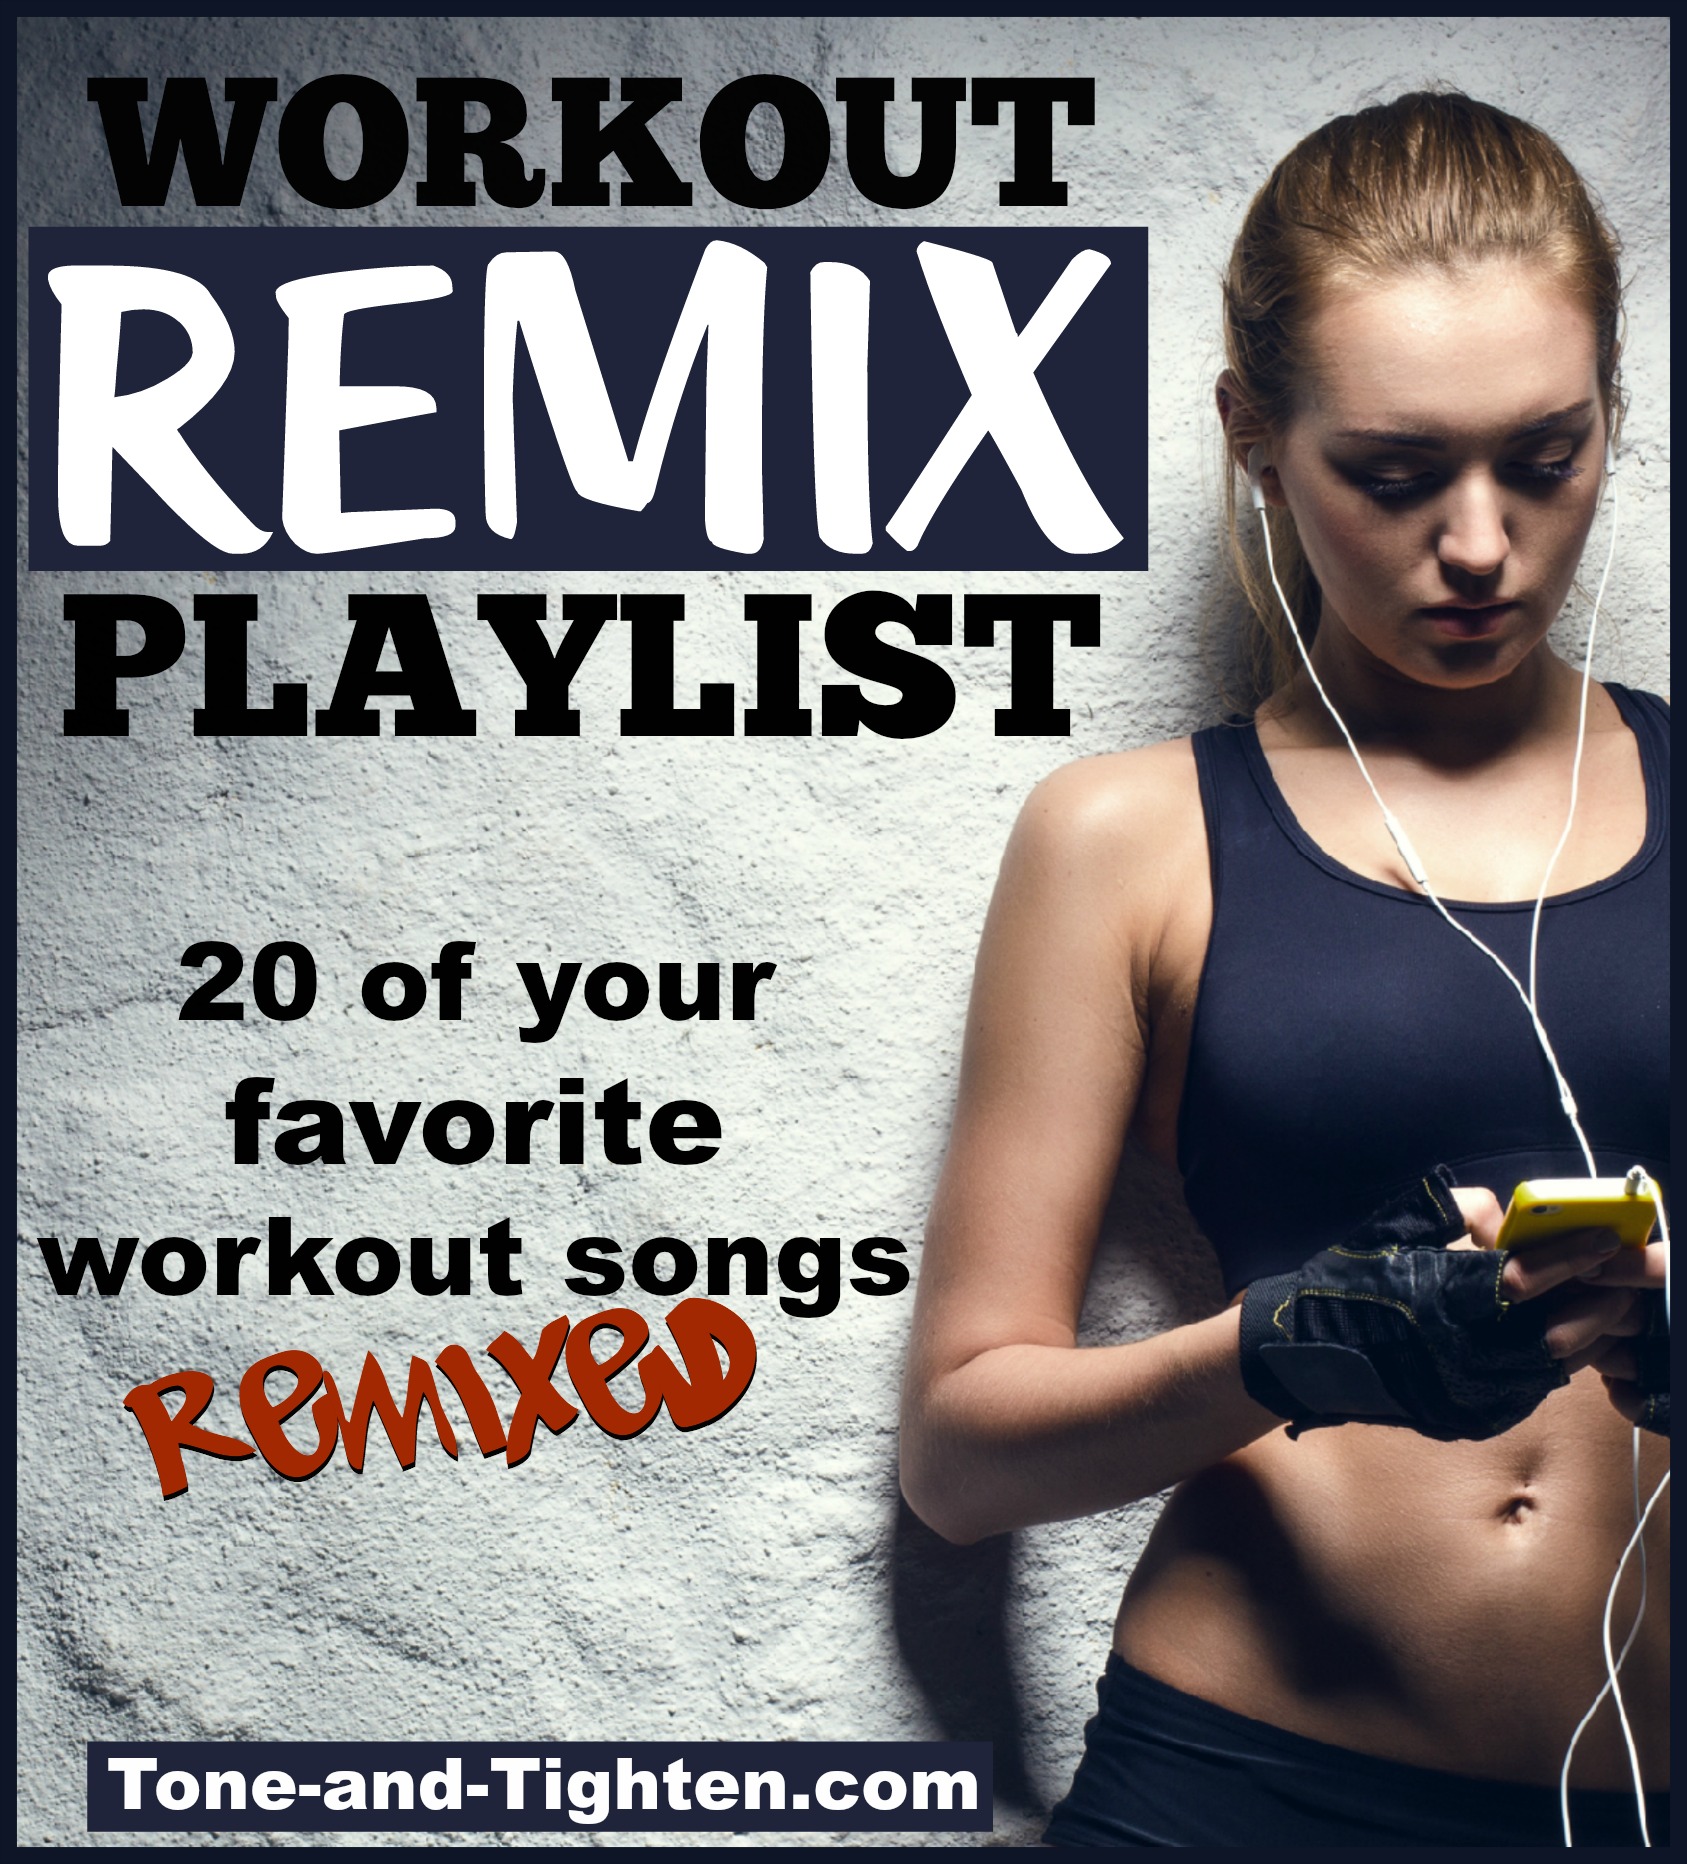 Best Workout Remixes – Power Playlist – Your Favorite Workout Songs Remixed